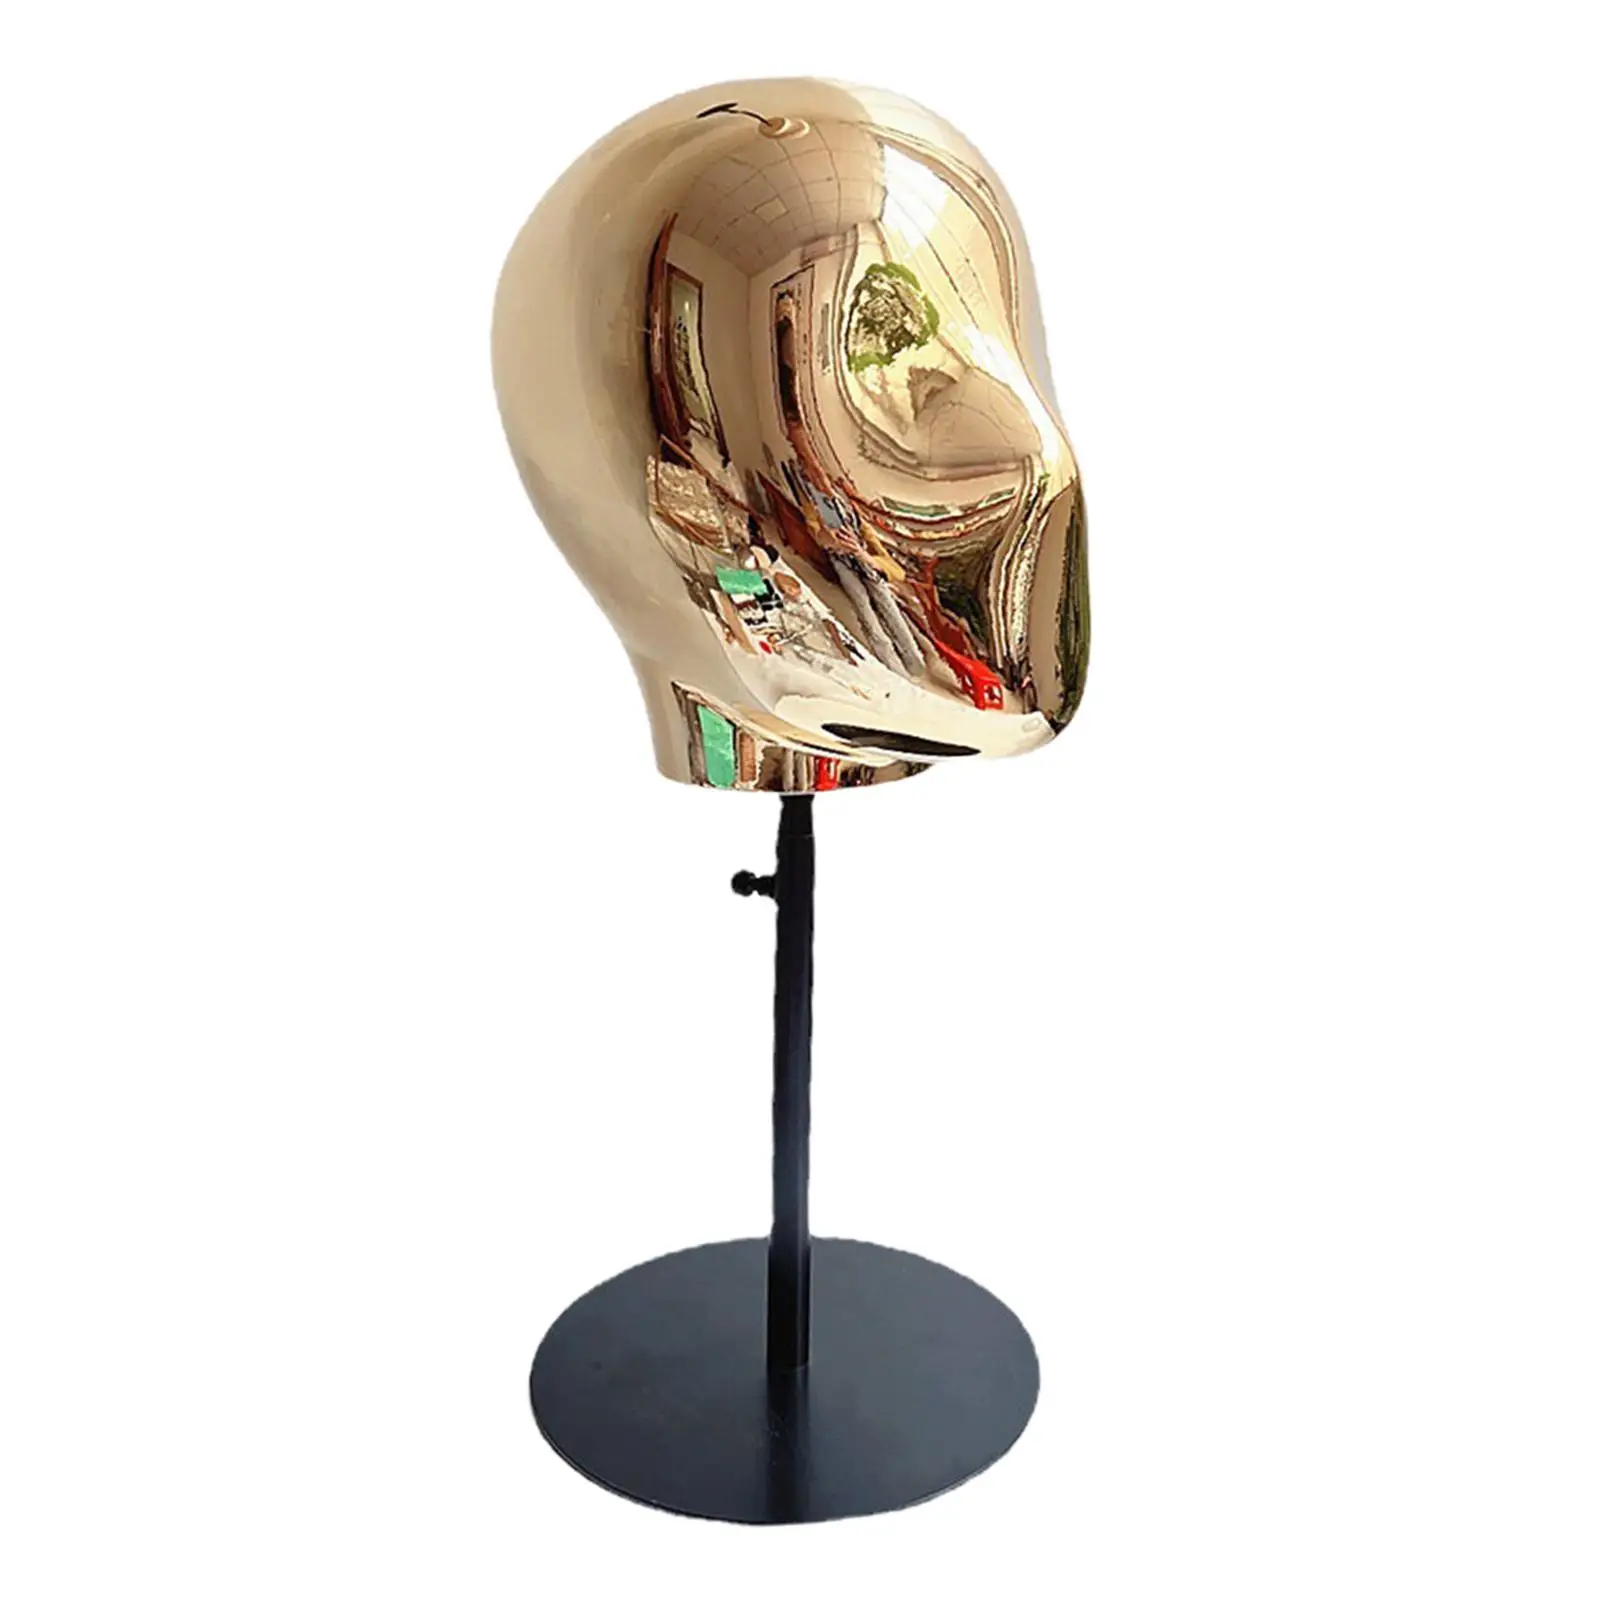 Mannequin Styling Head Wig Making Caps Display Stand for Glasses Hat Hairpieces Total 15.7-20.8inch Tall